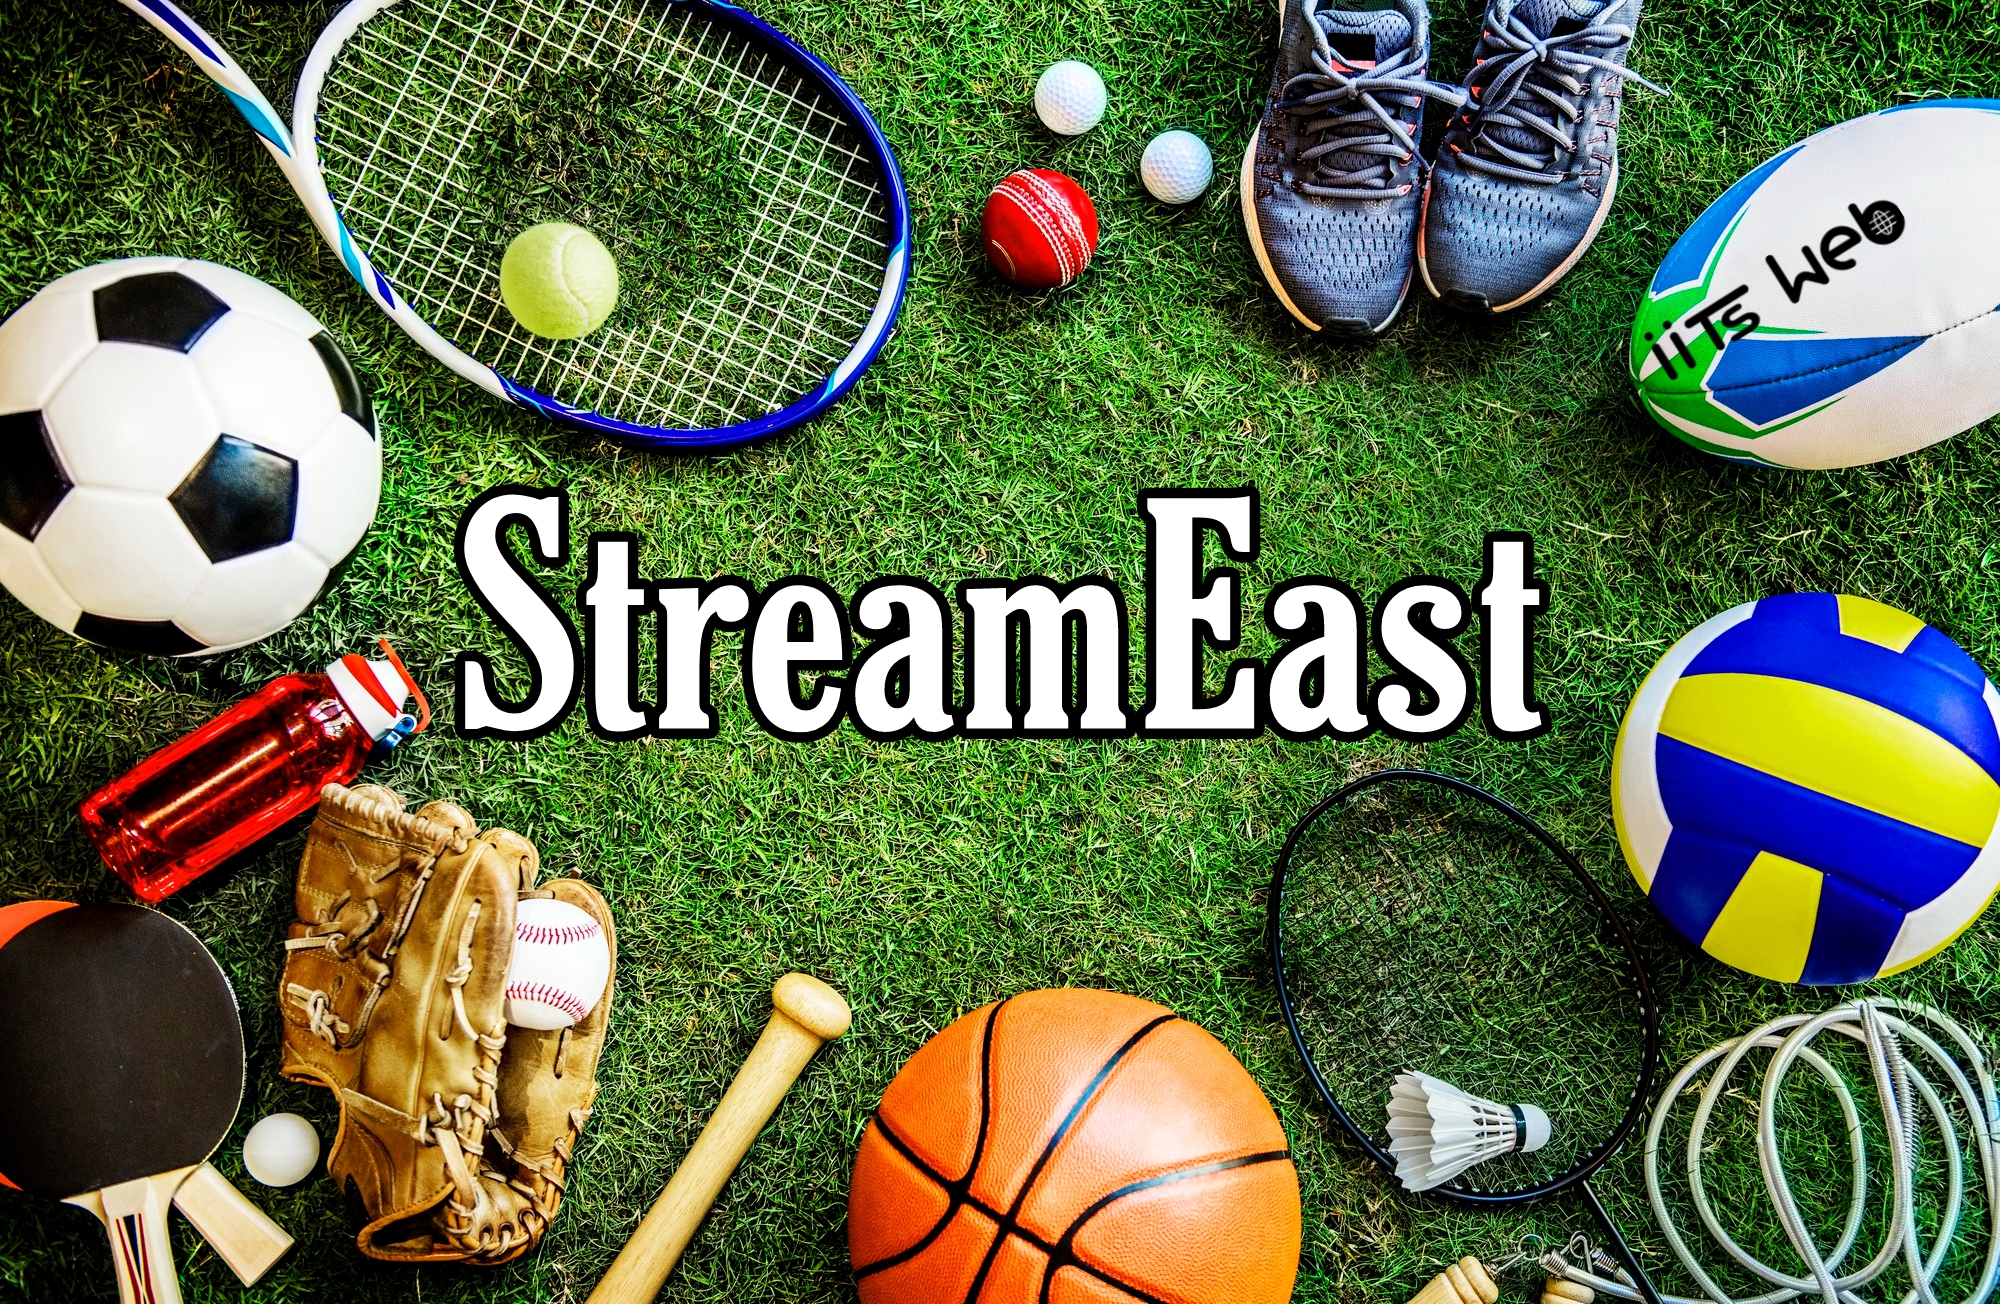 Top Ten Alternative you need to know about StreamEast